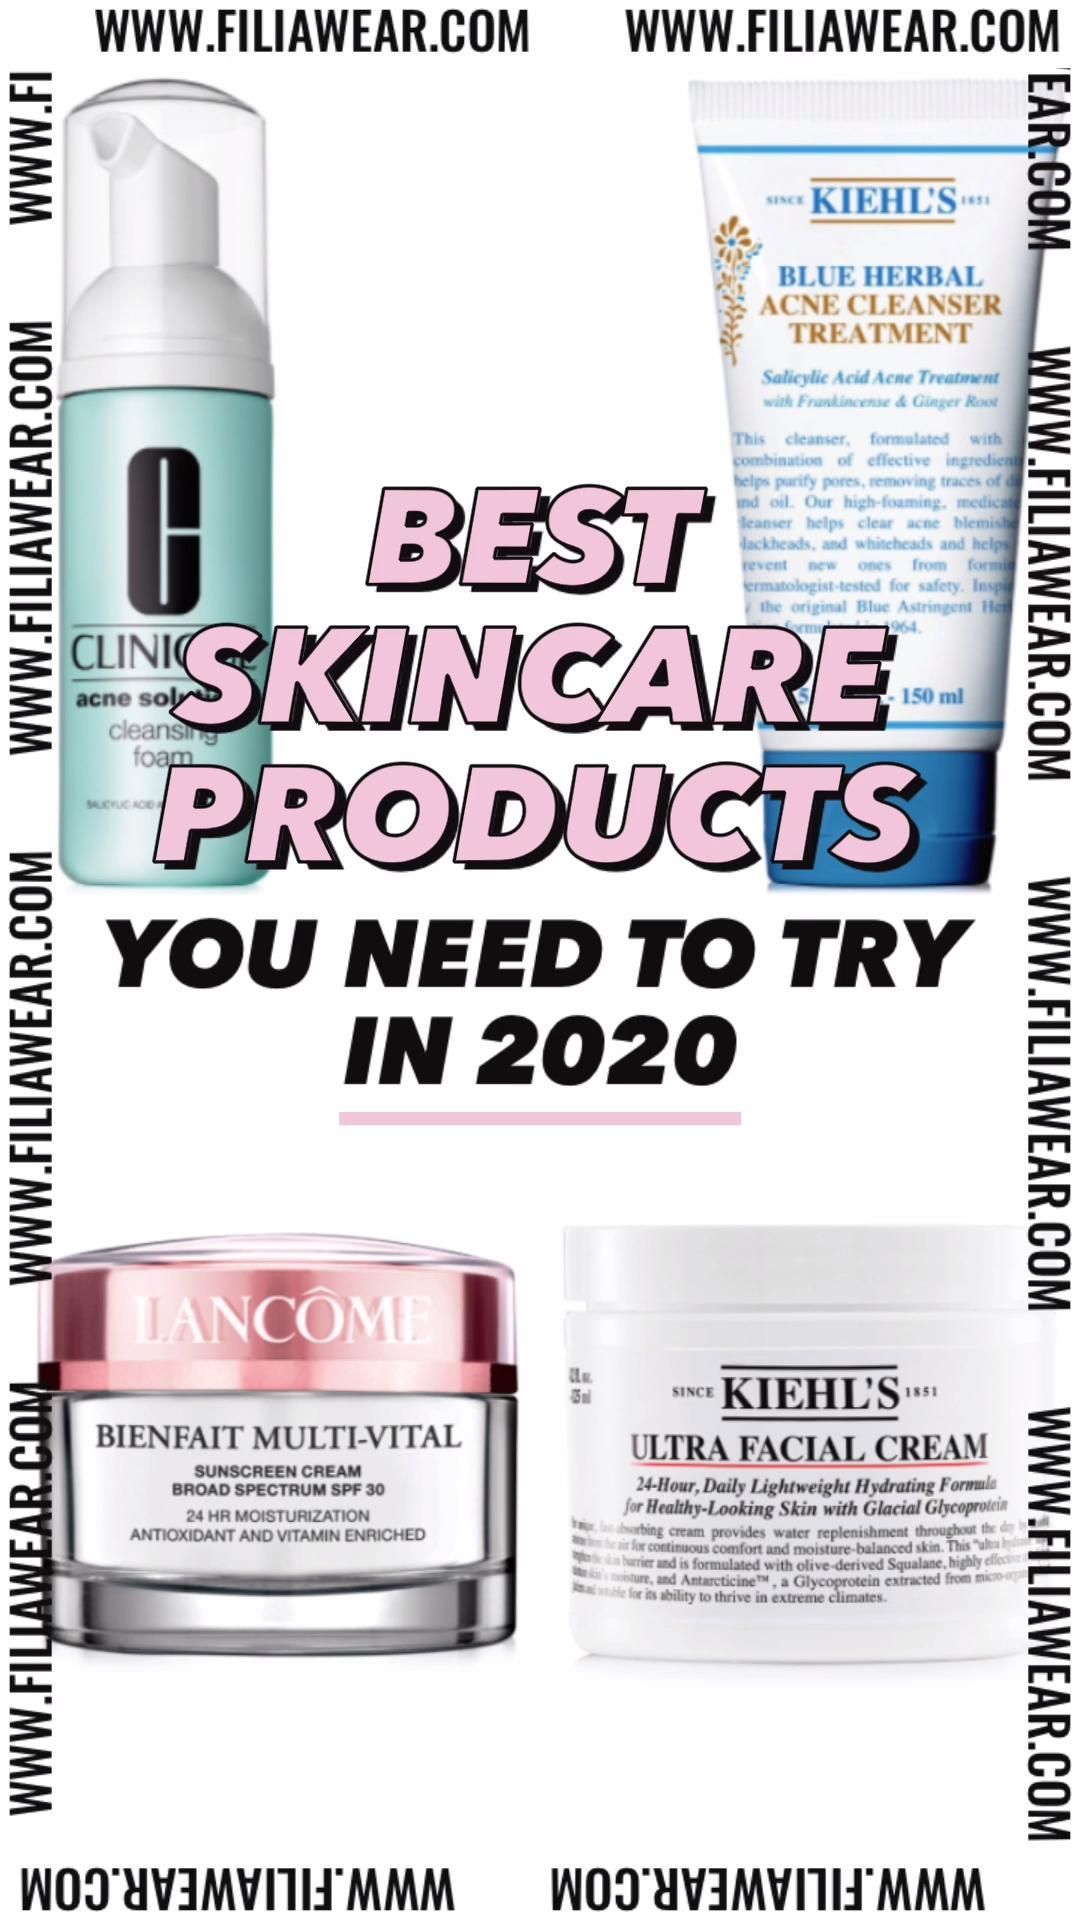 Best Skincare Products You Must Have - FILIA WEAR - Best Skincare Products You Must Have - FILIA WEAR -   17 beauty Routines products ideas